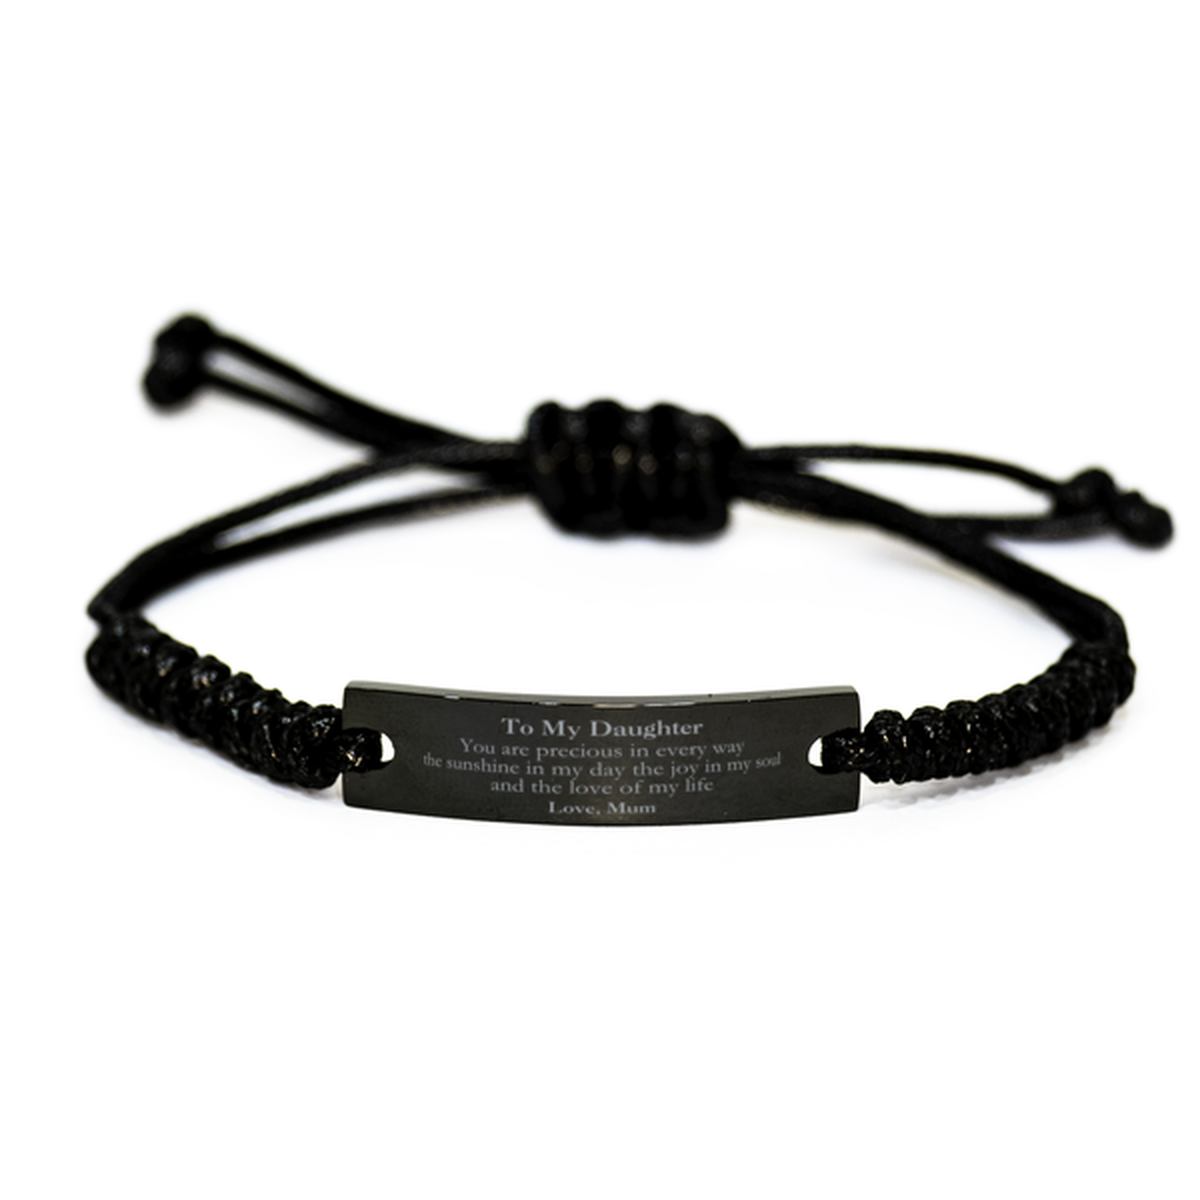 Graduation Gifts for Daughter Black Rope Bracelet Present from Mum, Christmas Daughter Birthday Gifts Daughter You are precious in every way the sunshine in my day. Love, Mum